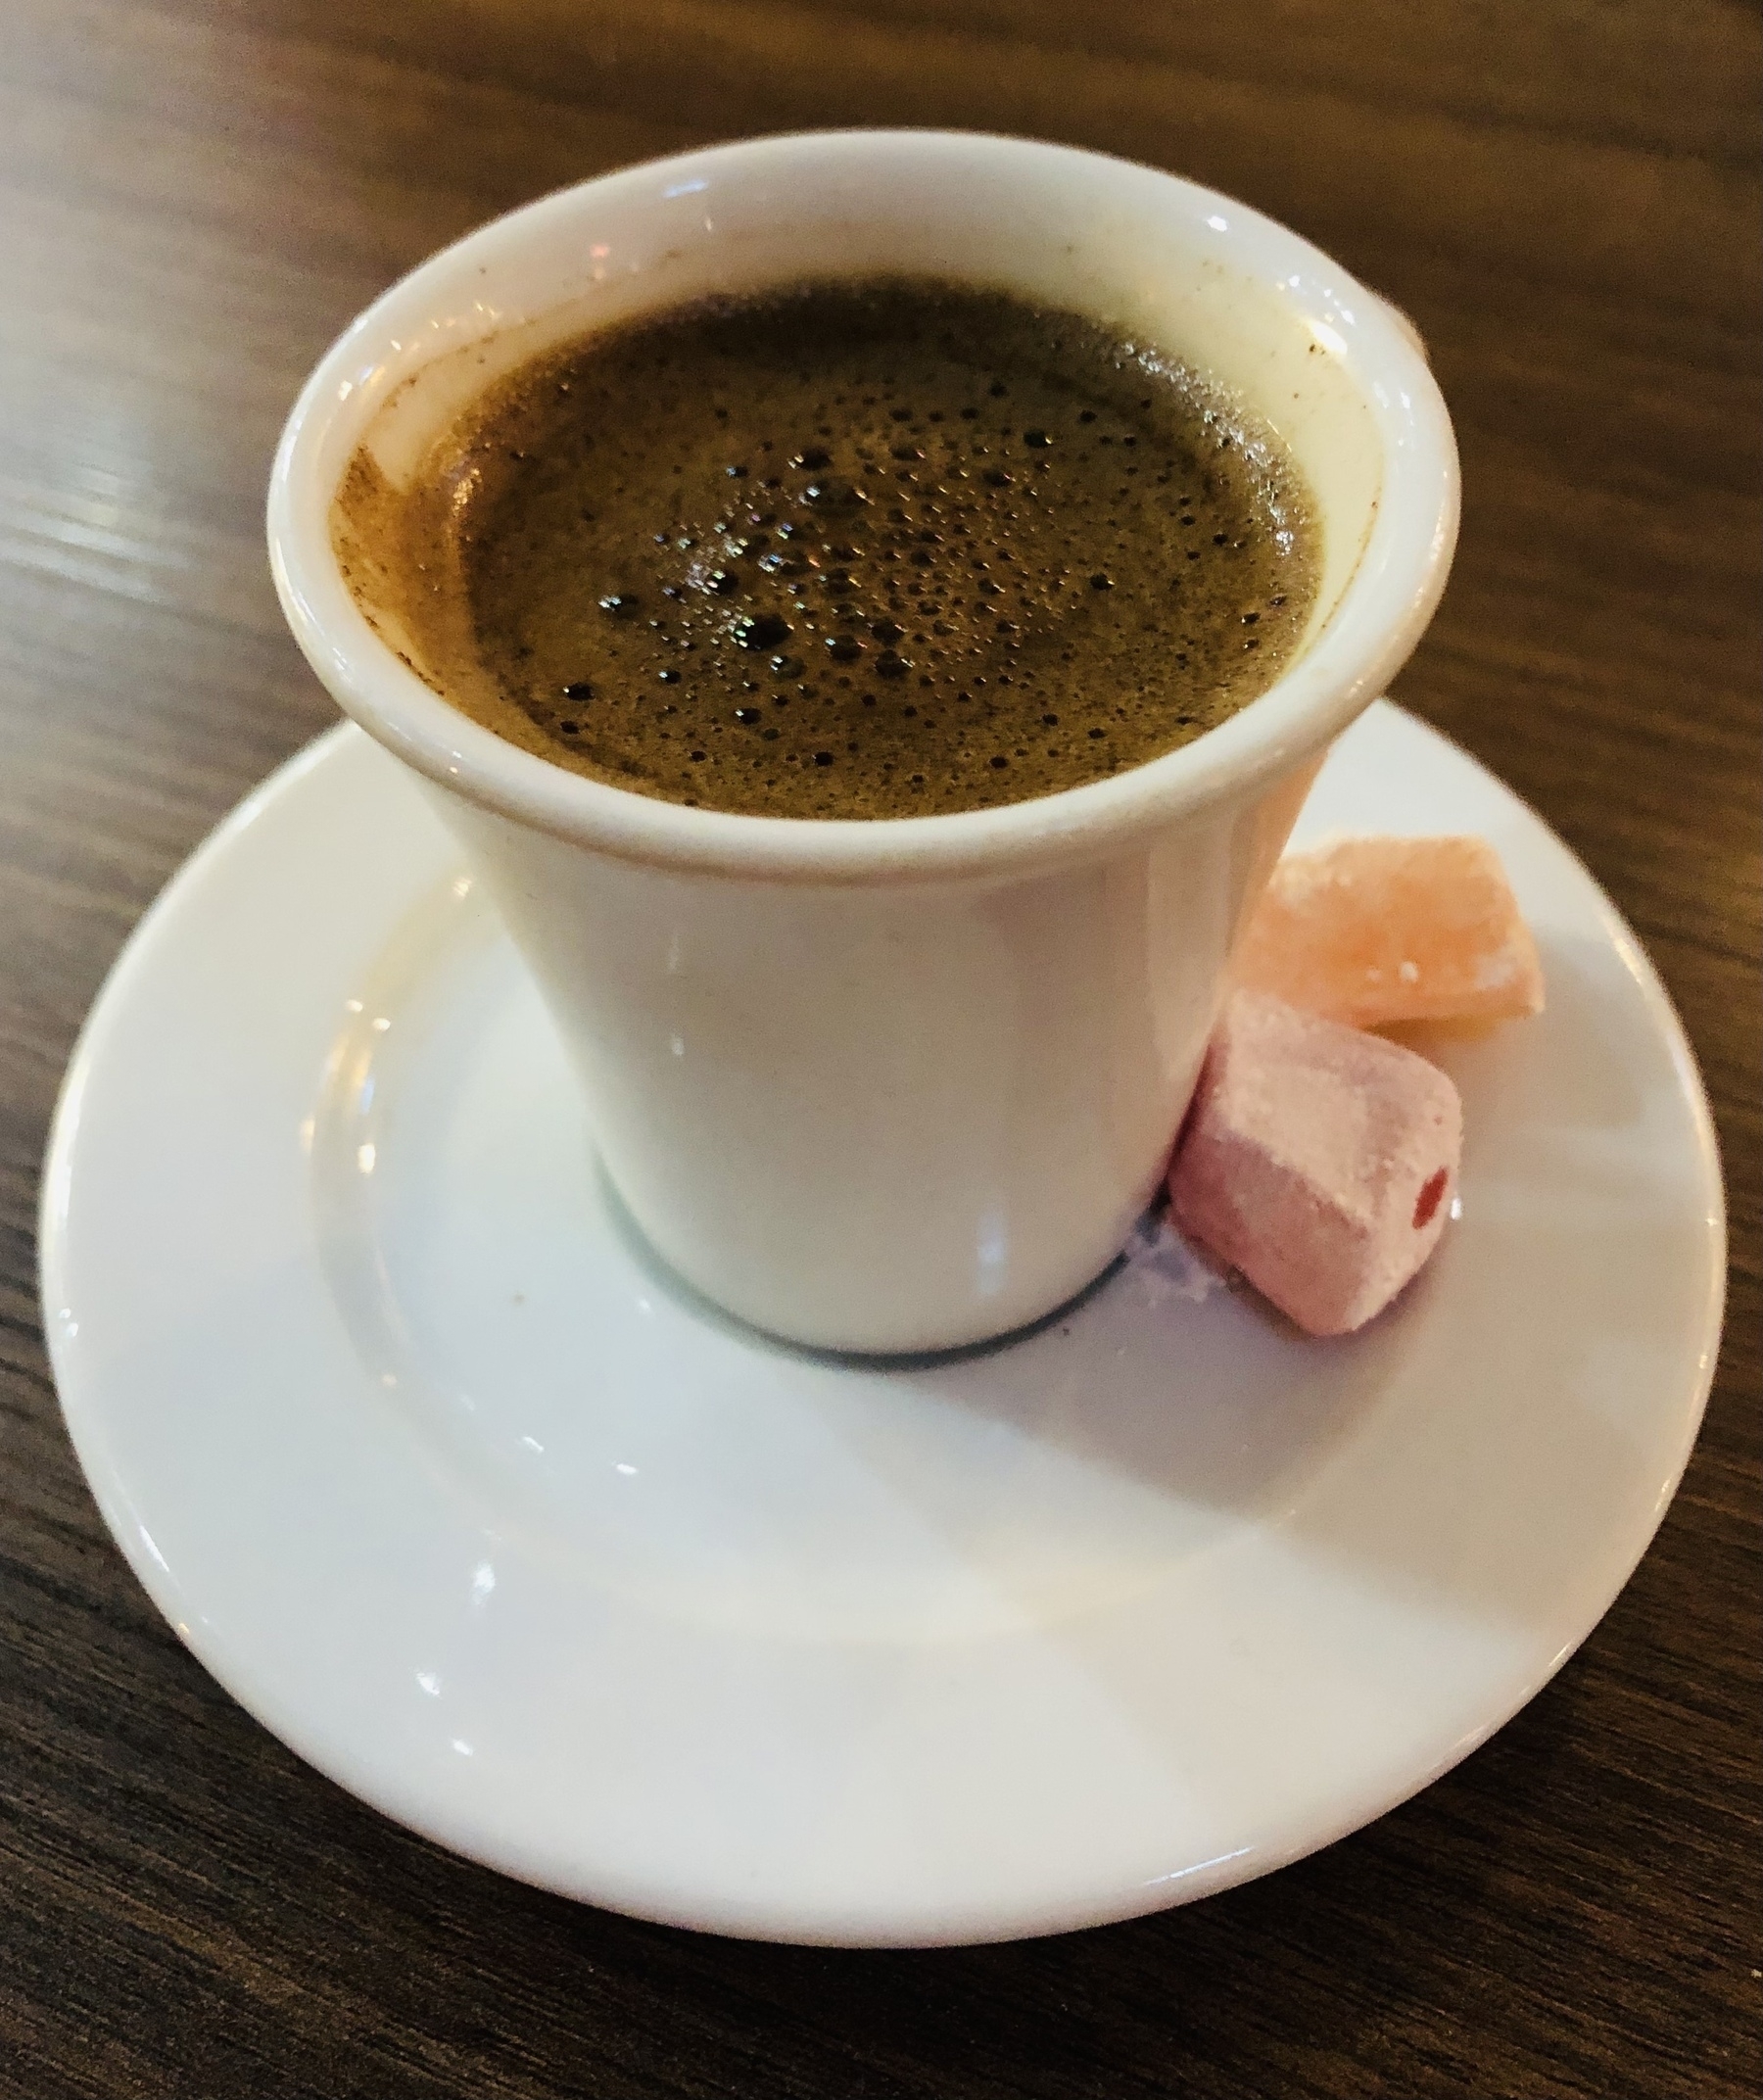 Turkish cup of coffee with a side of Turkish delight